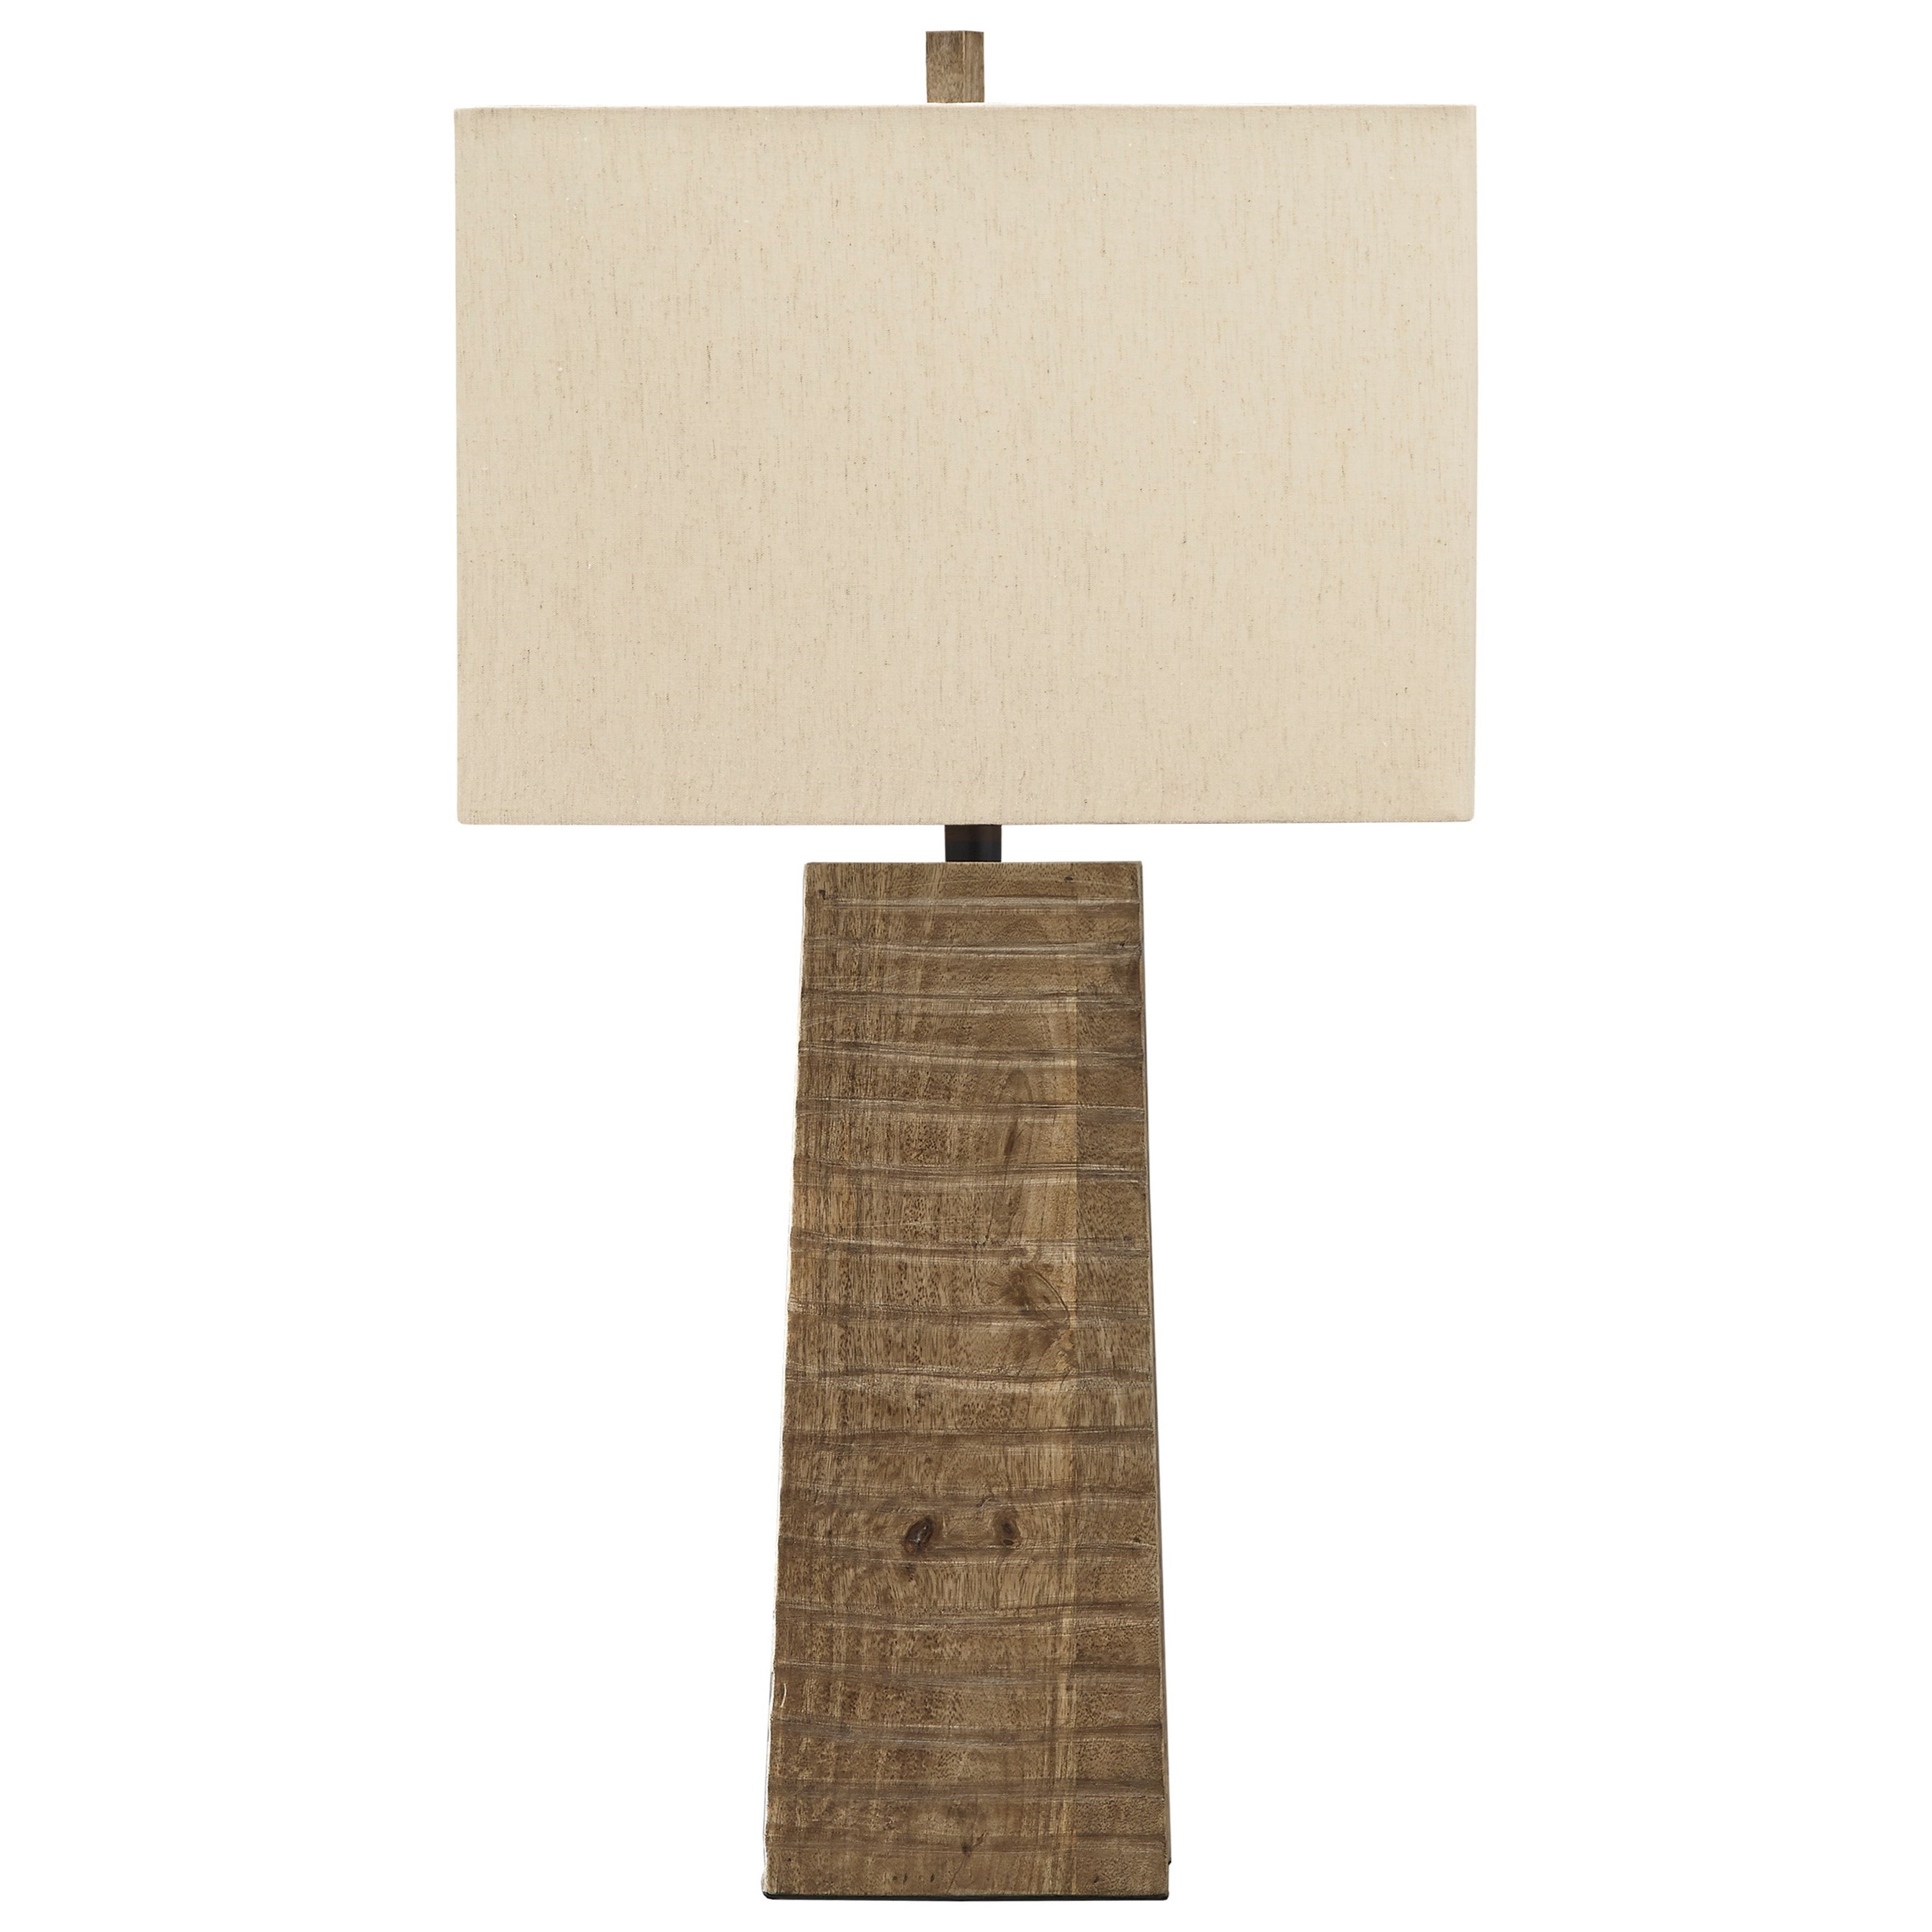 grey wooden table lamp